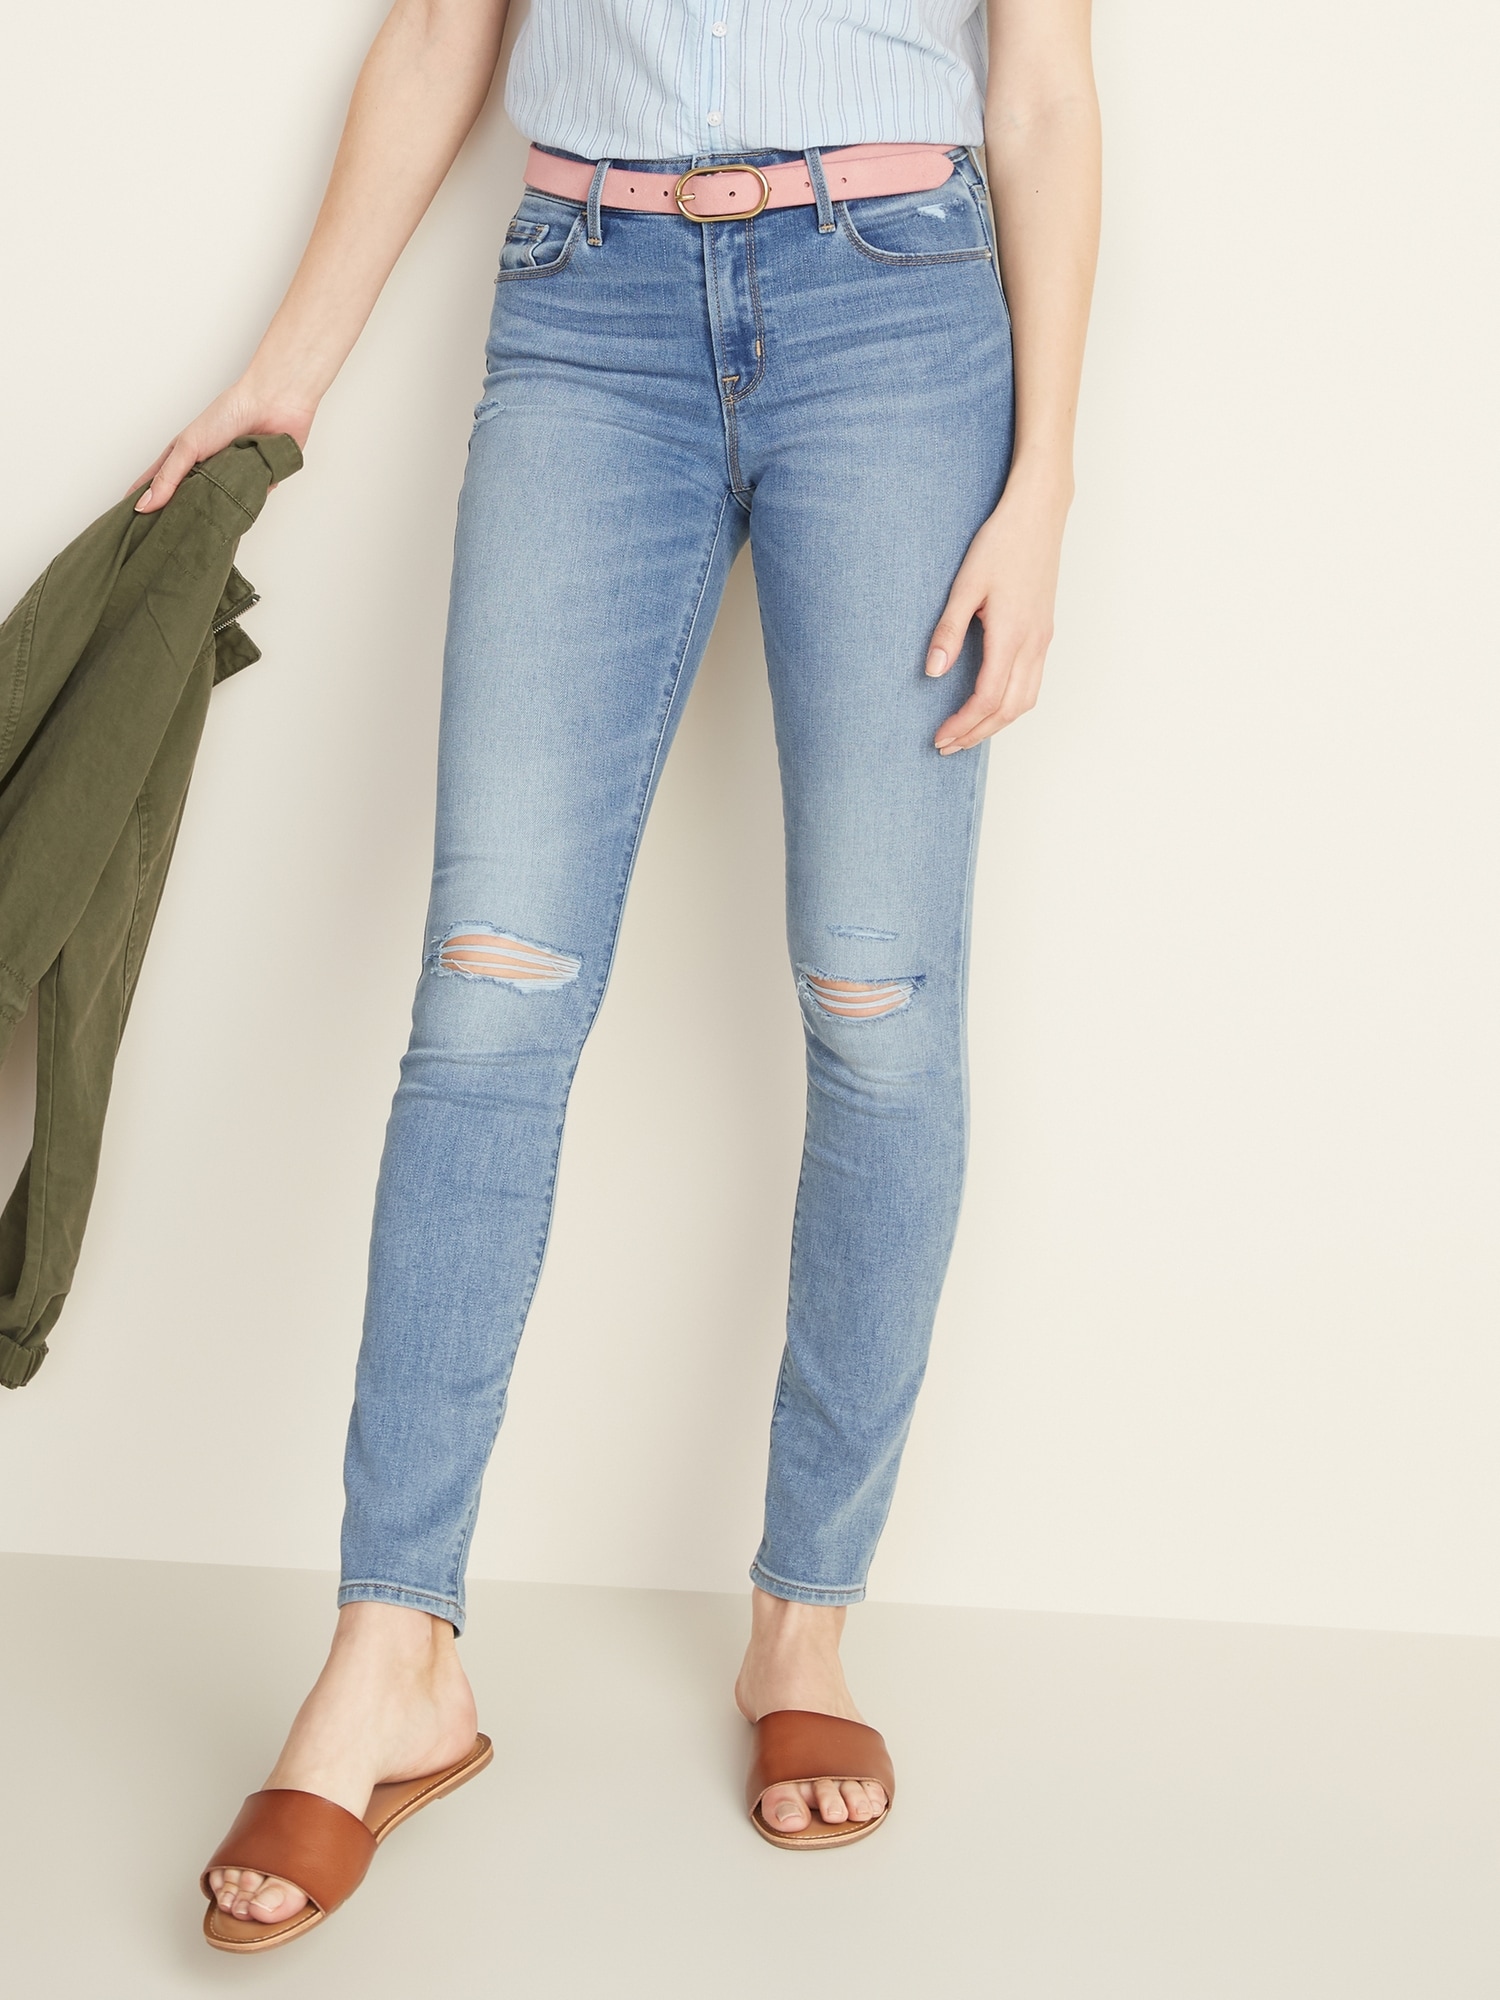 old navy jeans curvy straight